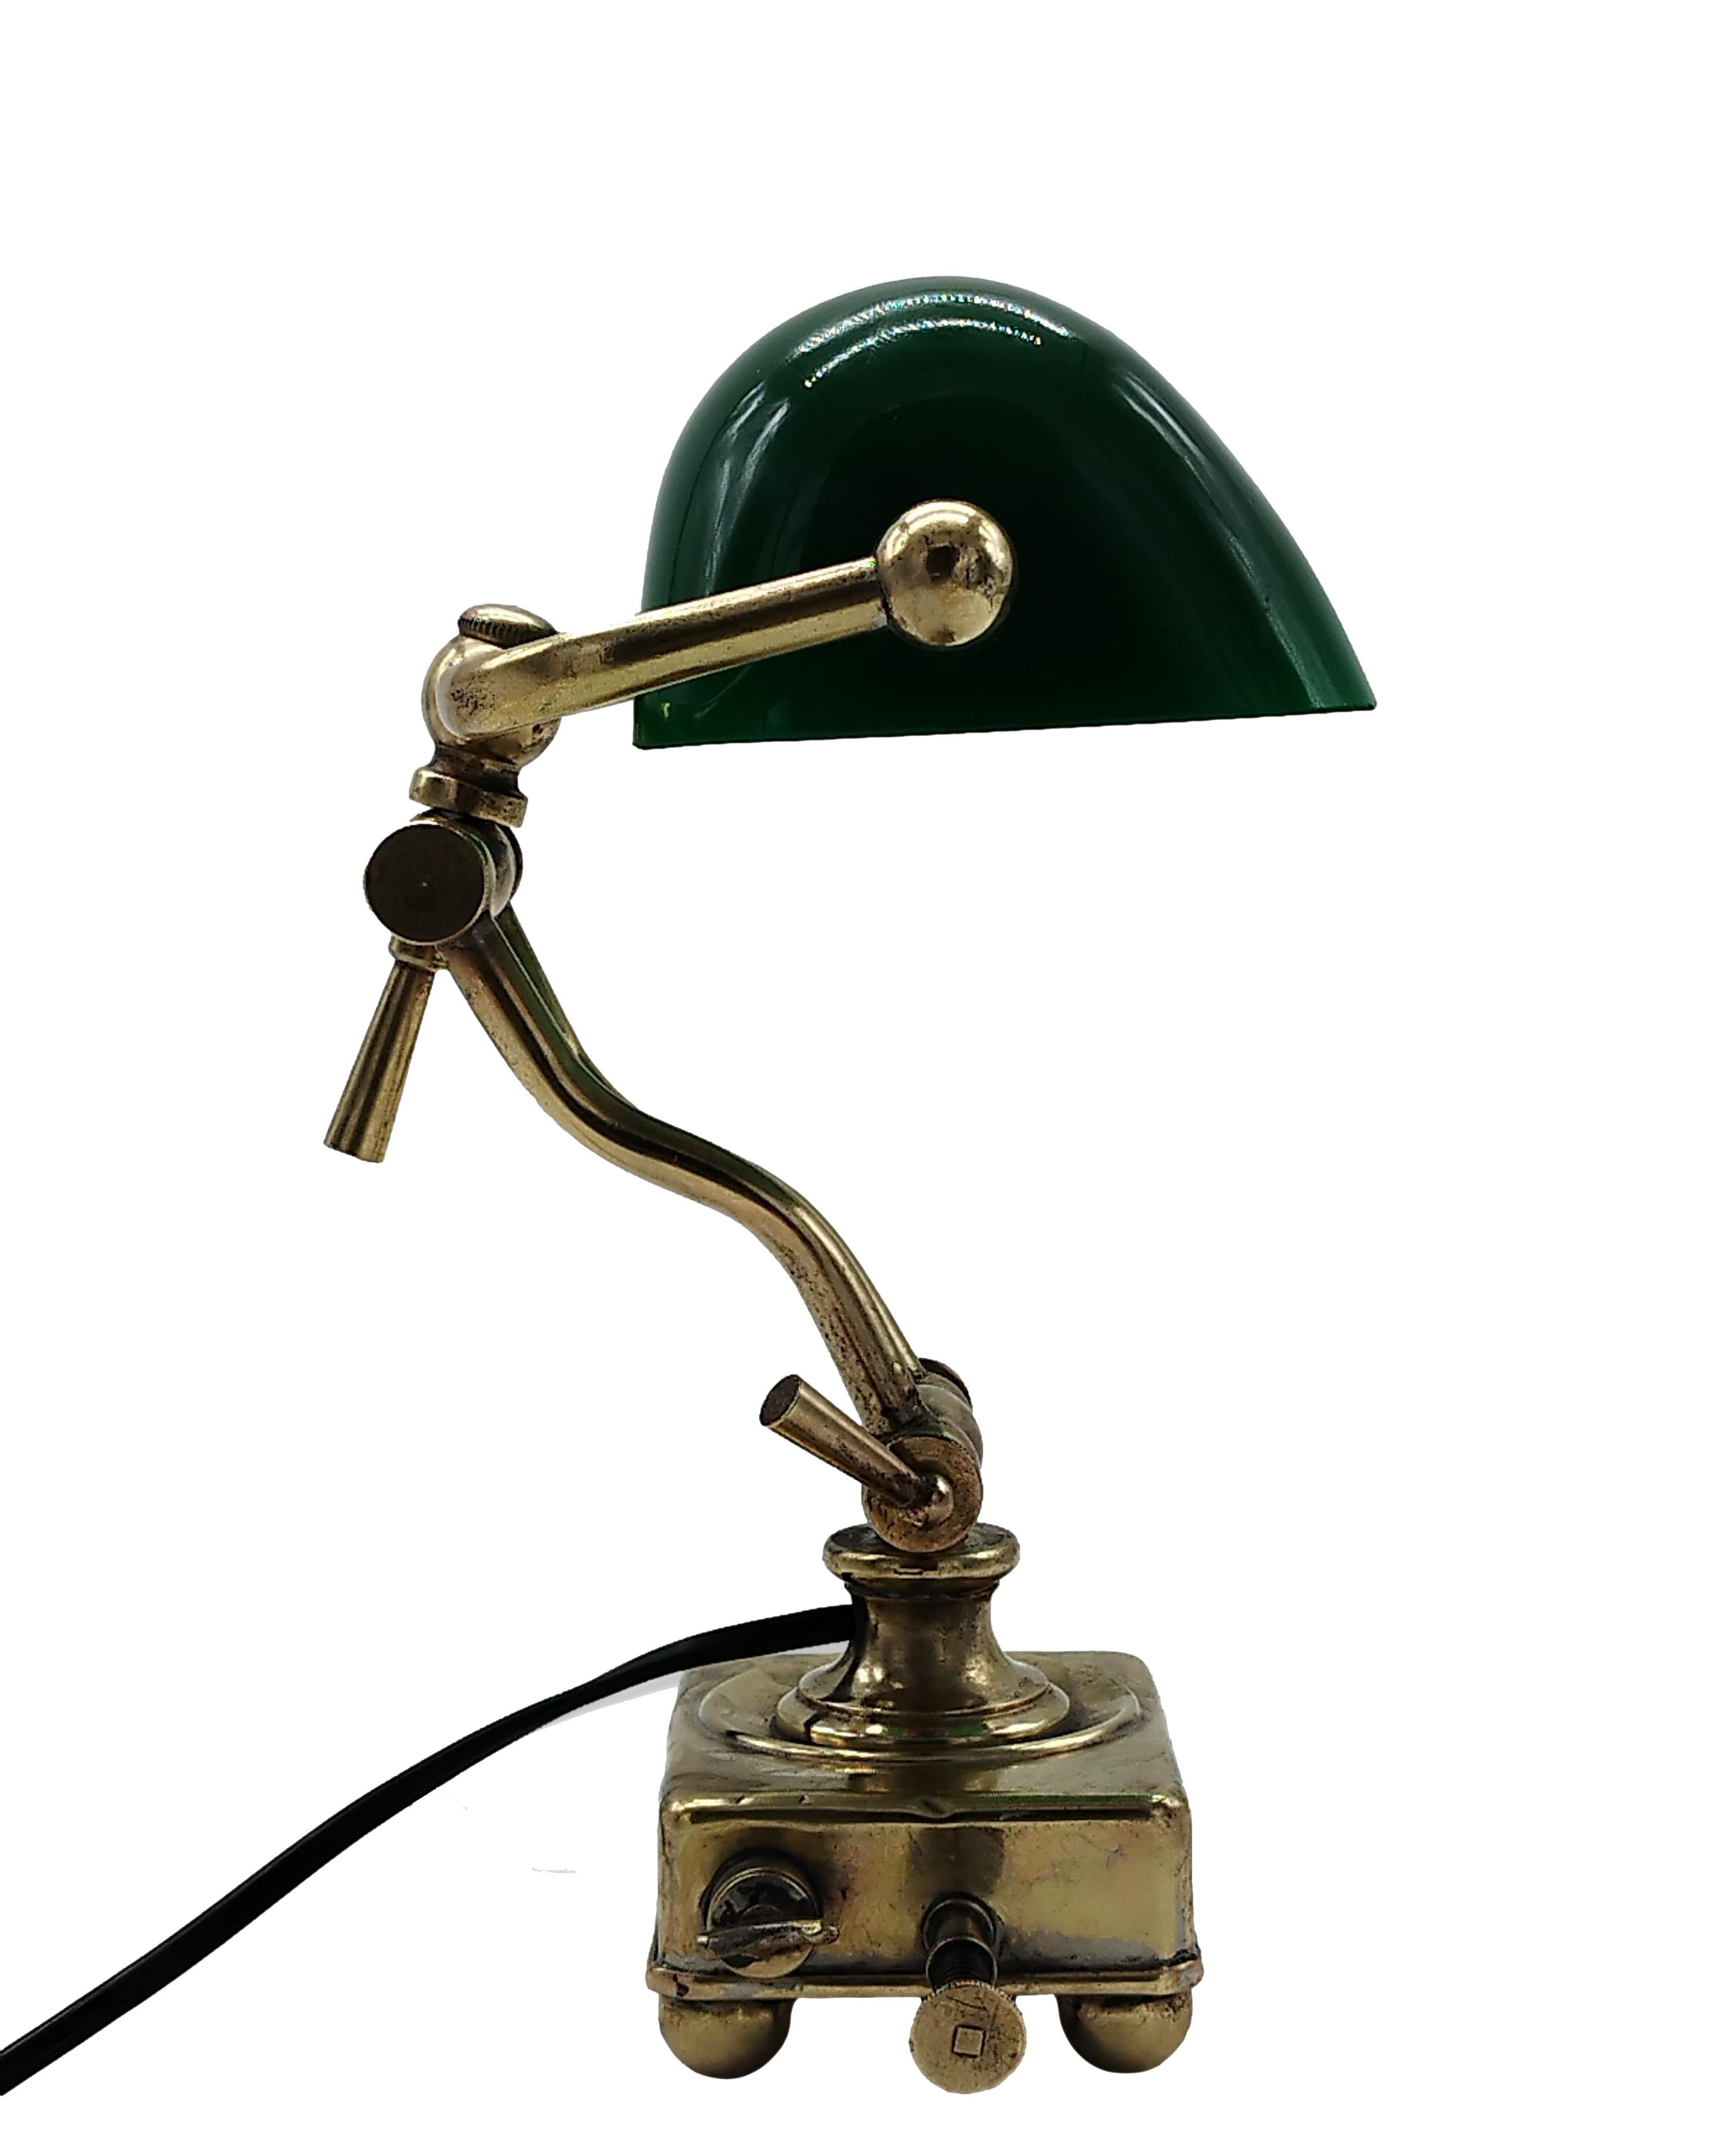 Iconic and beautiful classic Ministerial lamp with green glass, desk lamp. Perfectly preserved and working with original switch. Various adjustable angles. Excellent furnishing item.
